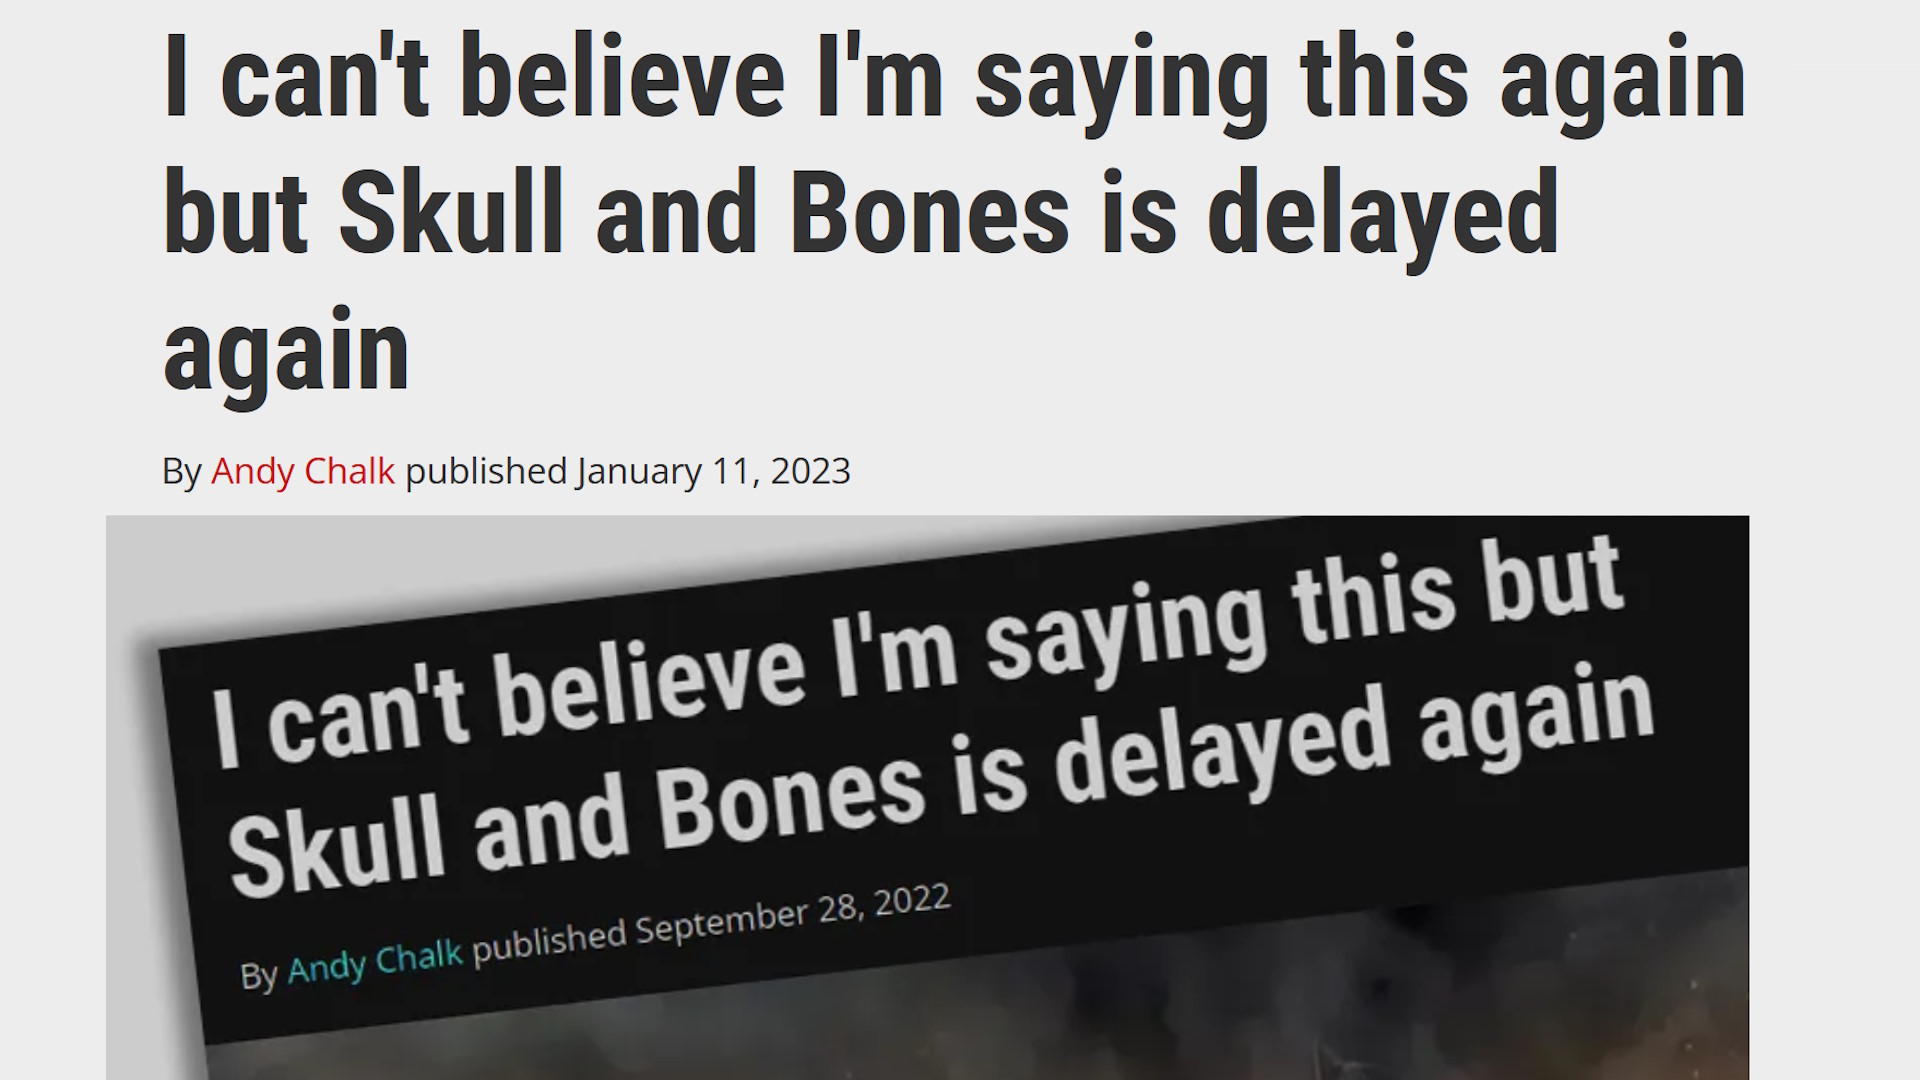  I can't believe I'm saying this again, again, but Skull and Bones is delayed again 